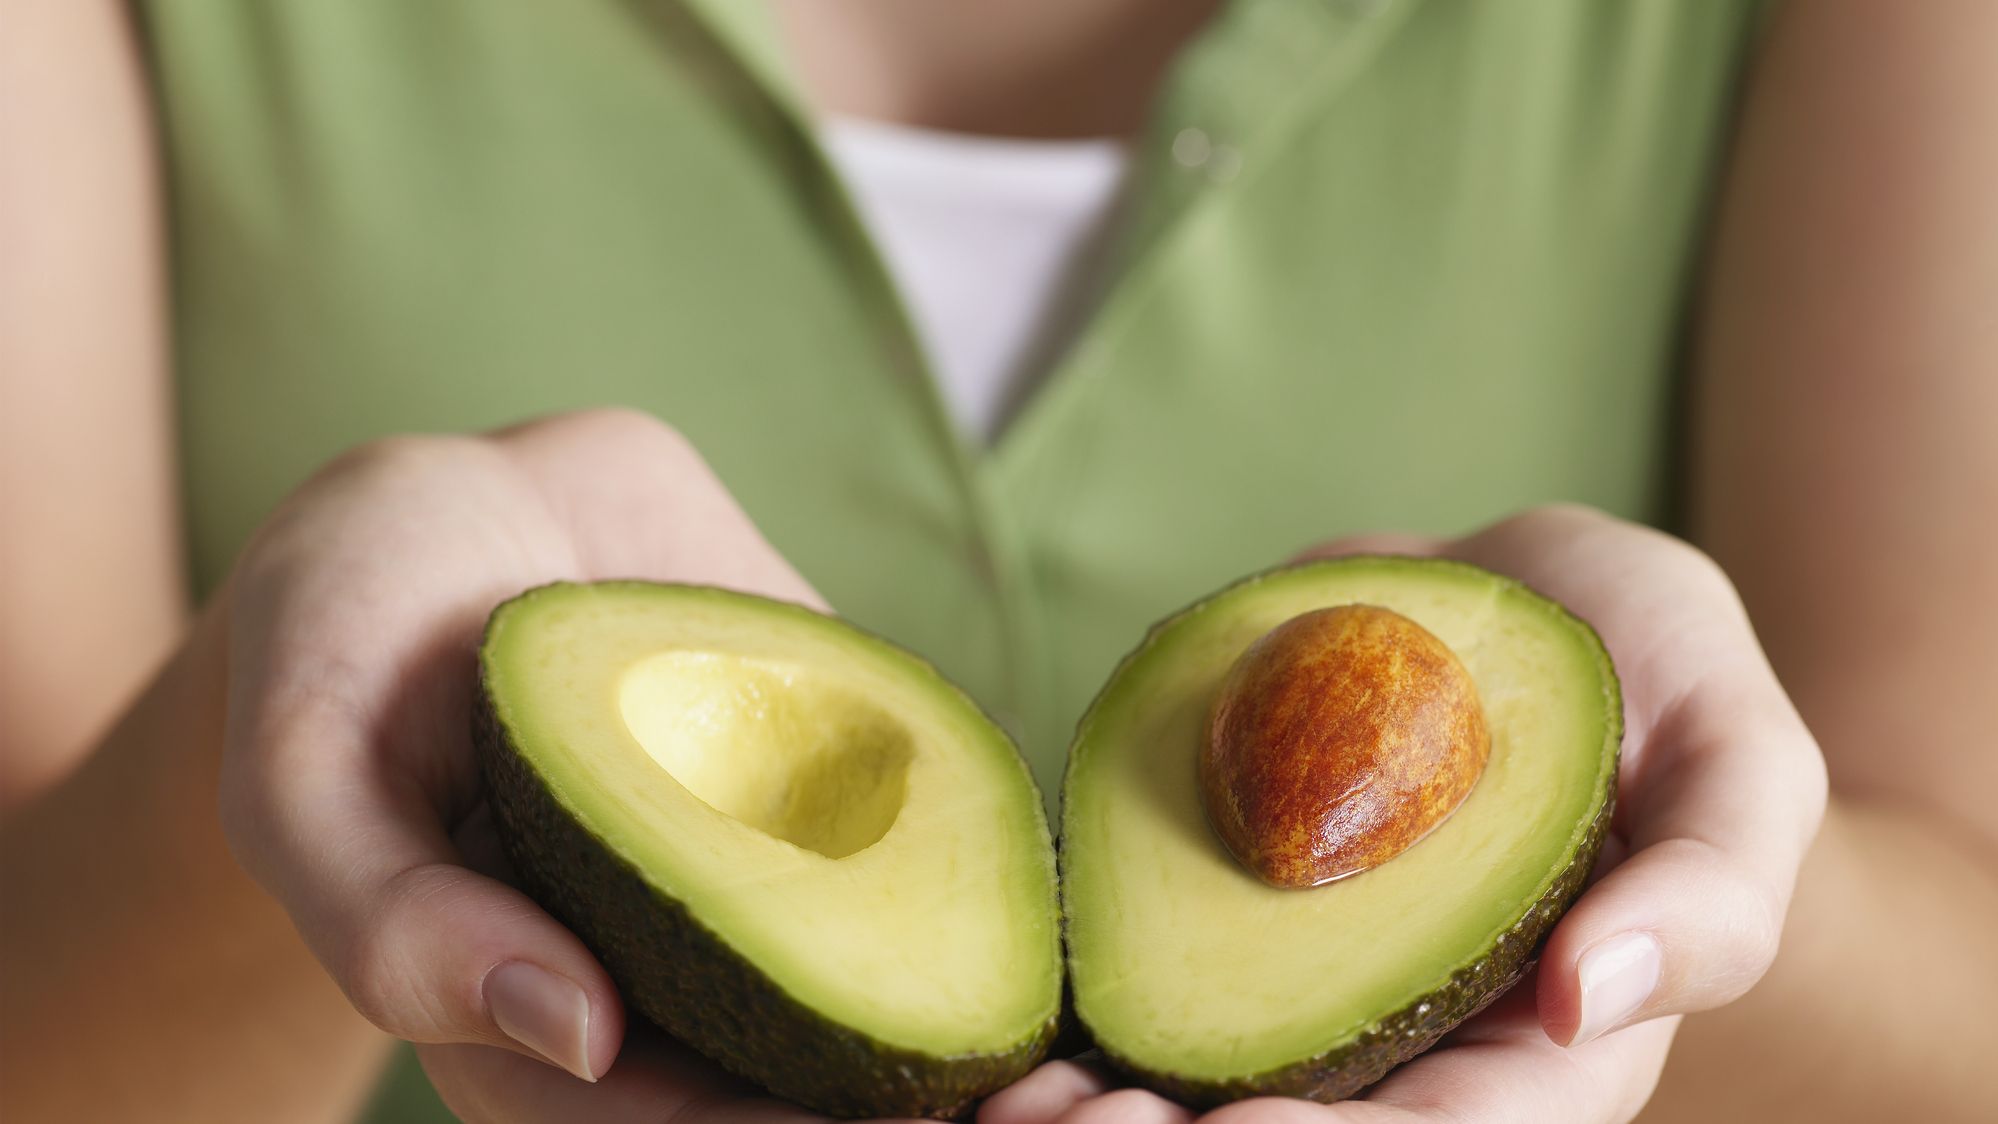 https://hips.hearstapps.com/hmg-prod/images/how-to-ripen-avocados-6414878941210.jpg?crop=1xw:0.74925xh;center,top